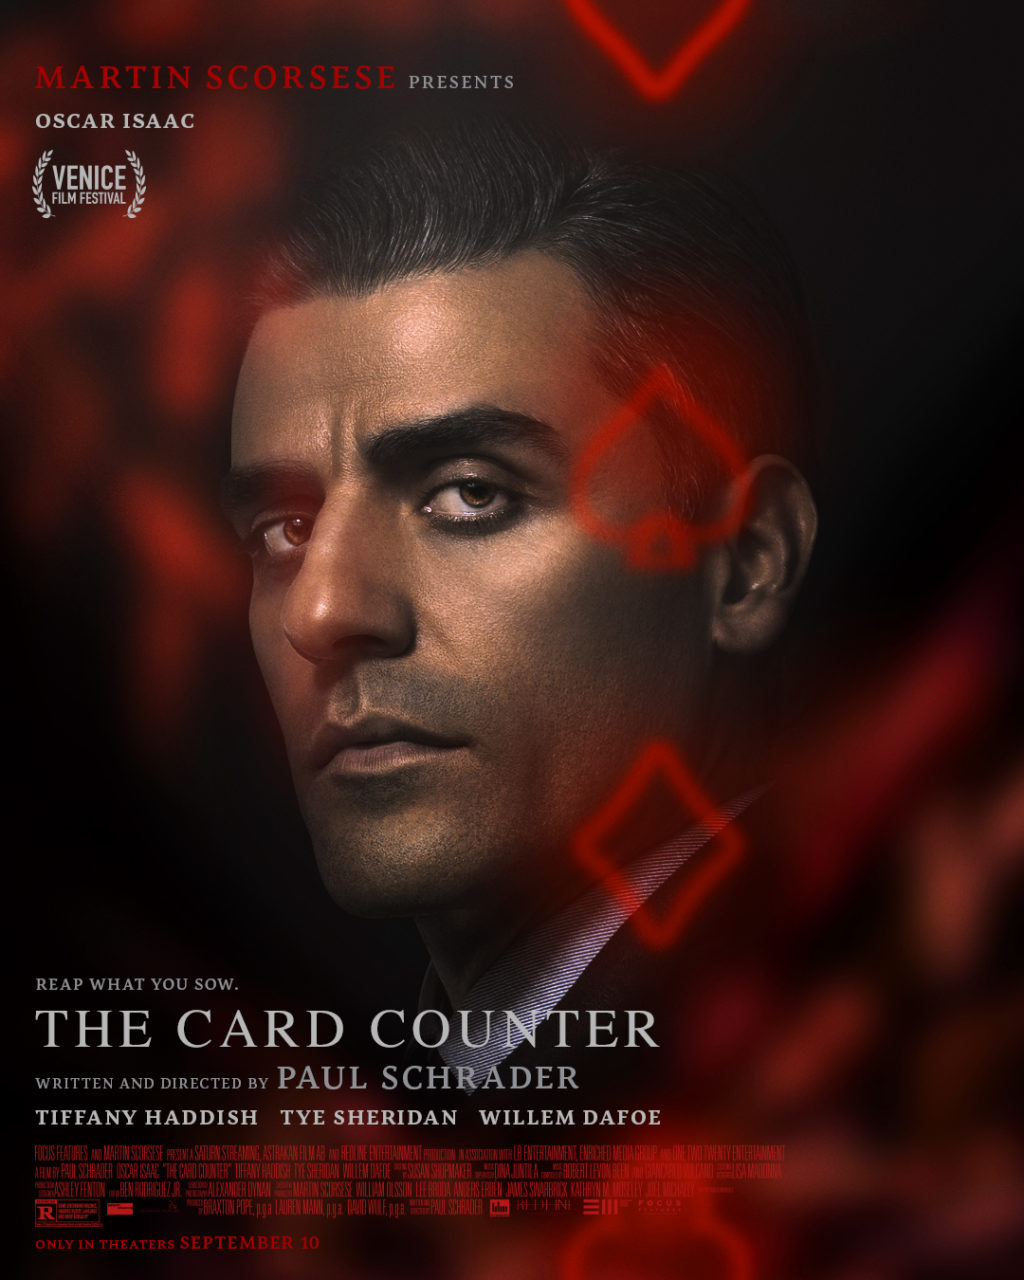 The Card Counter poster (Focus Features)